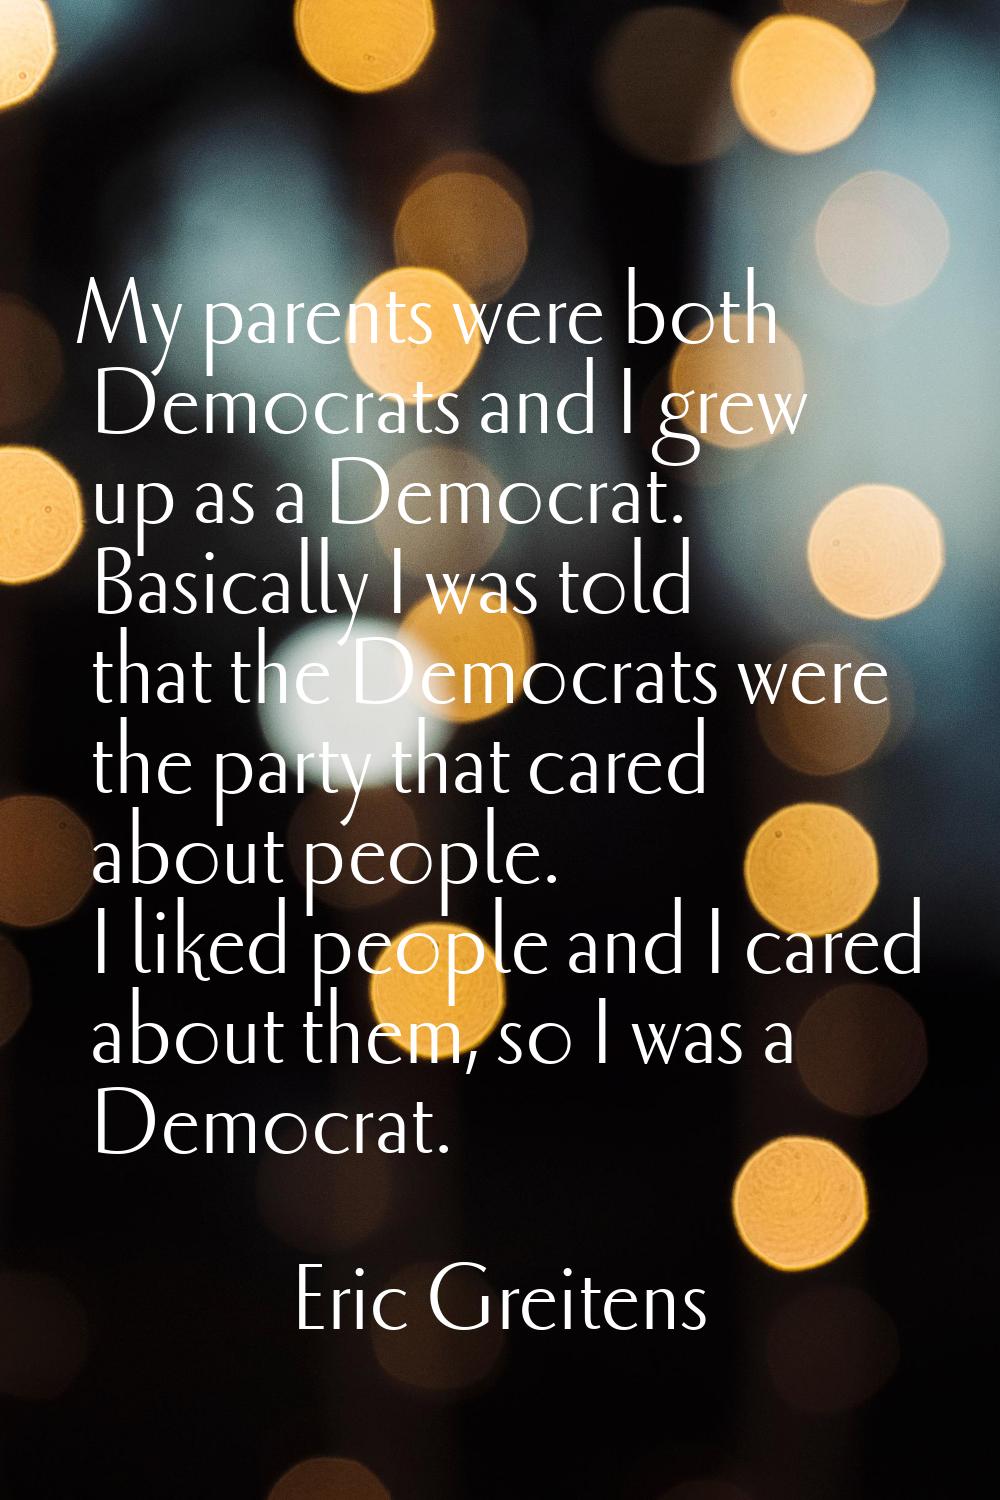 My parents were both Democrats and I grew up as a Democrat. Basically I was told that the Democrats